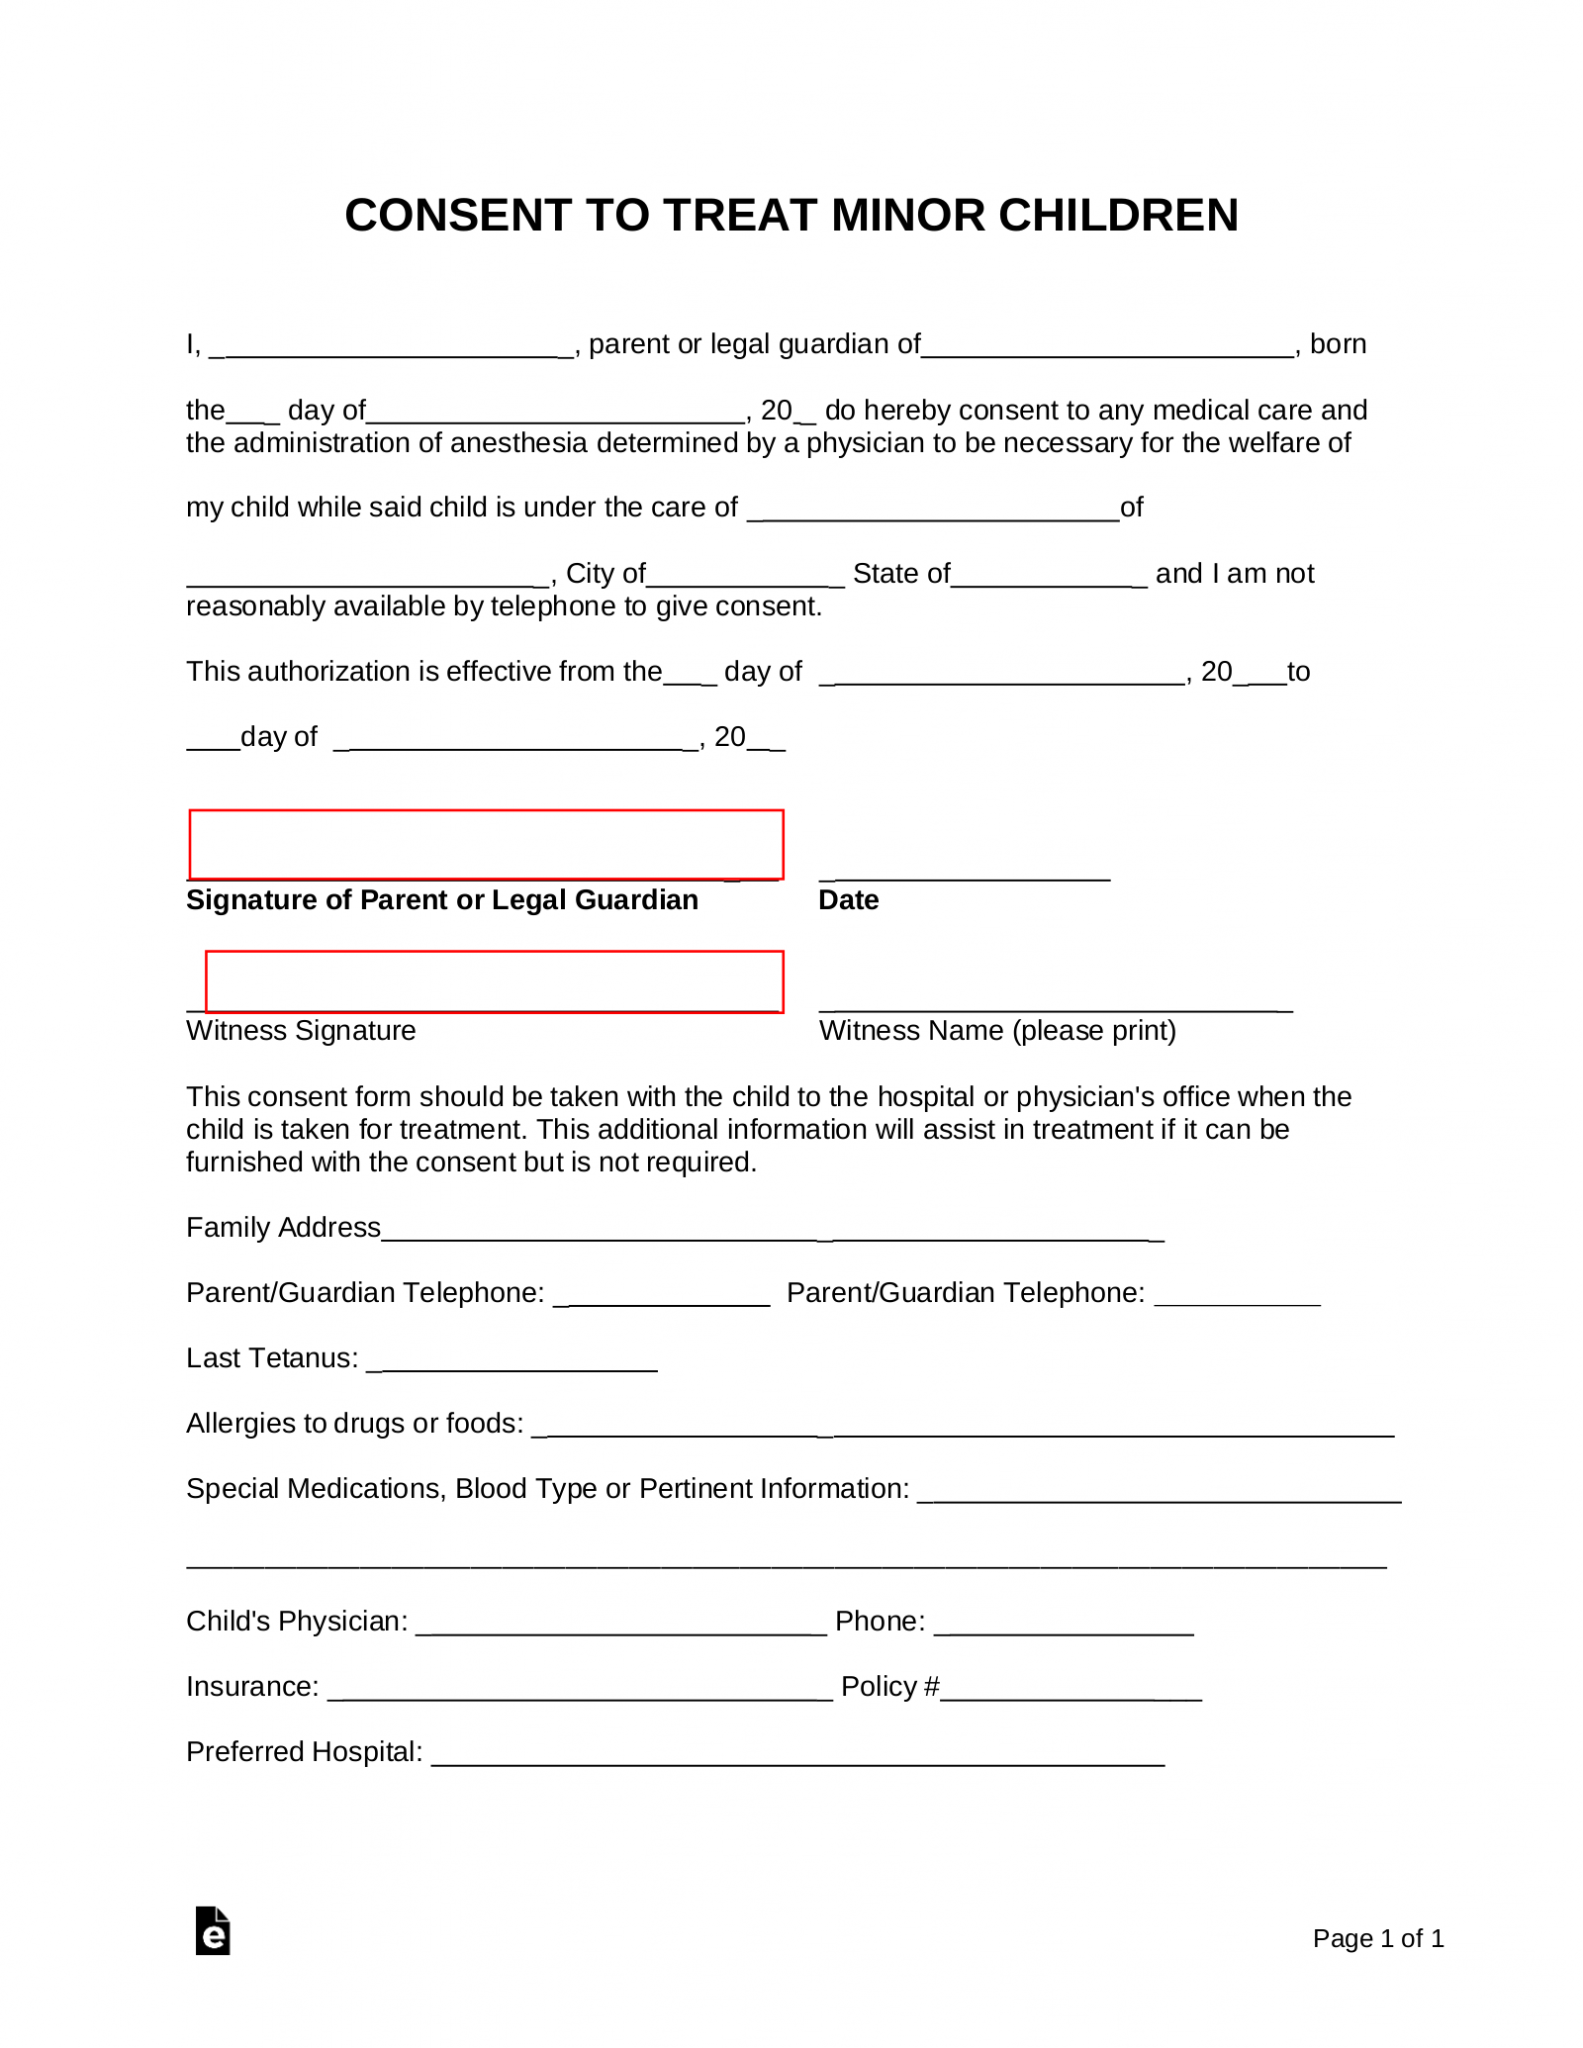 printable-child-medical-consent-form-notarized-printable-forms-free